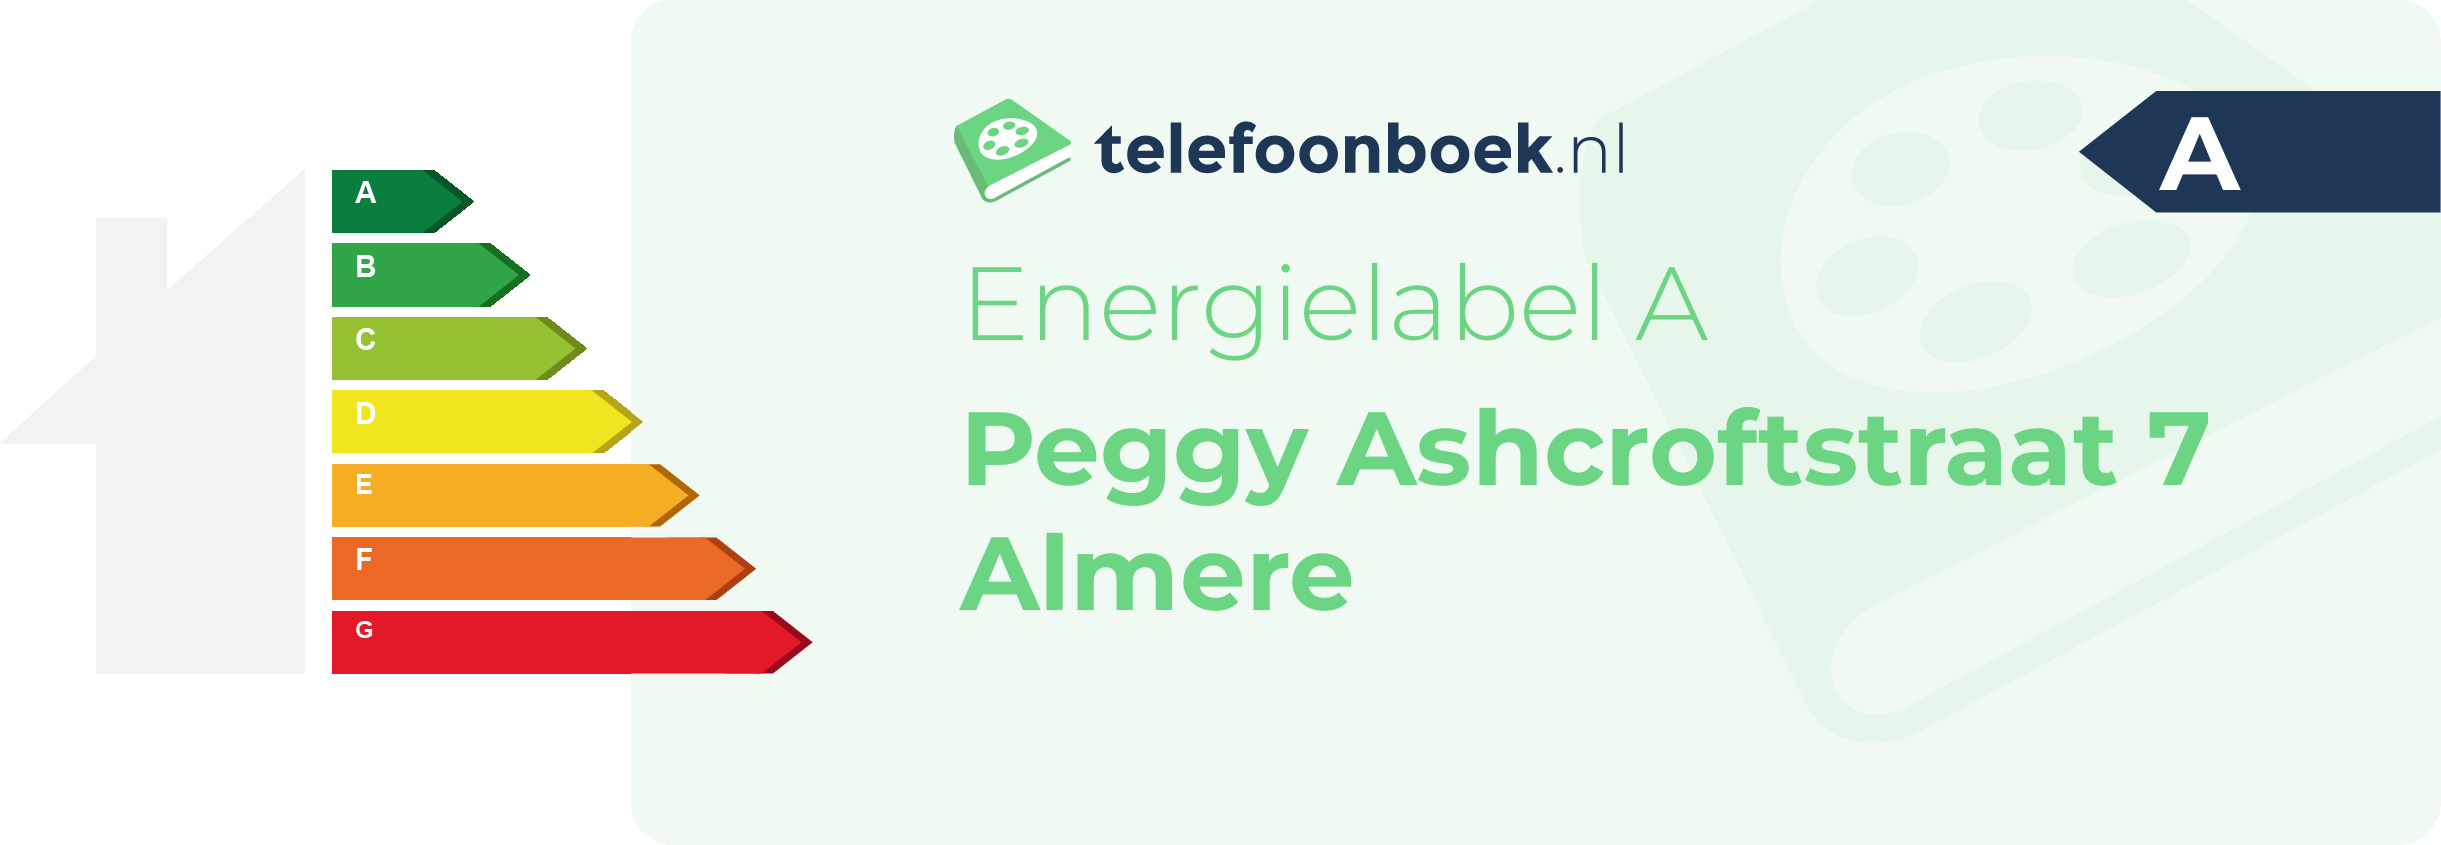 Energielabel Peggy Ashcroftstraat 7 Almere